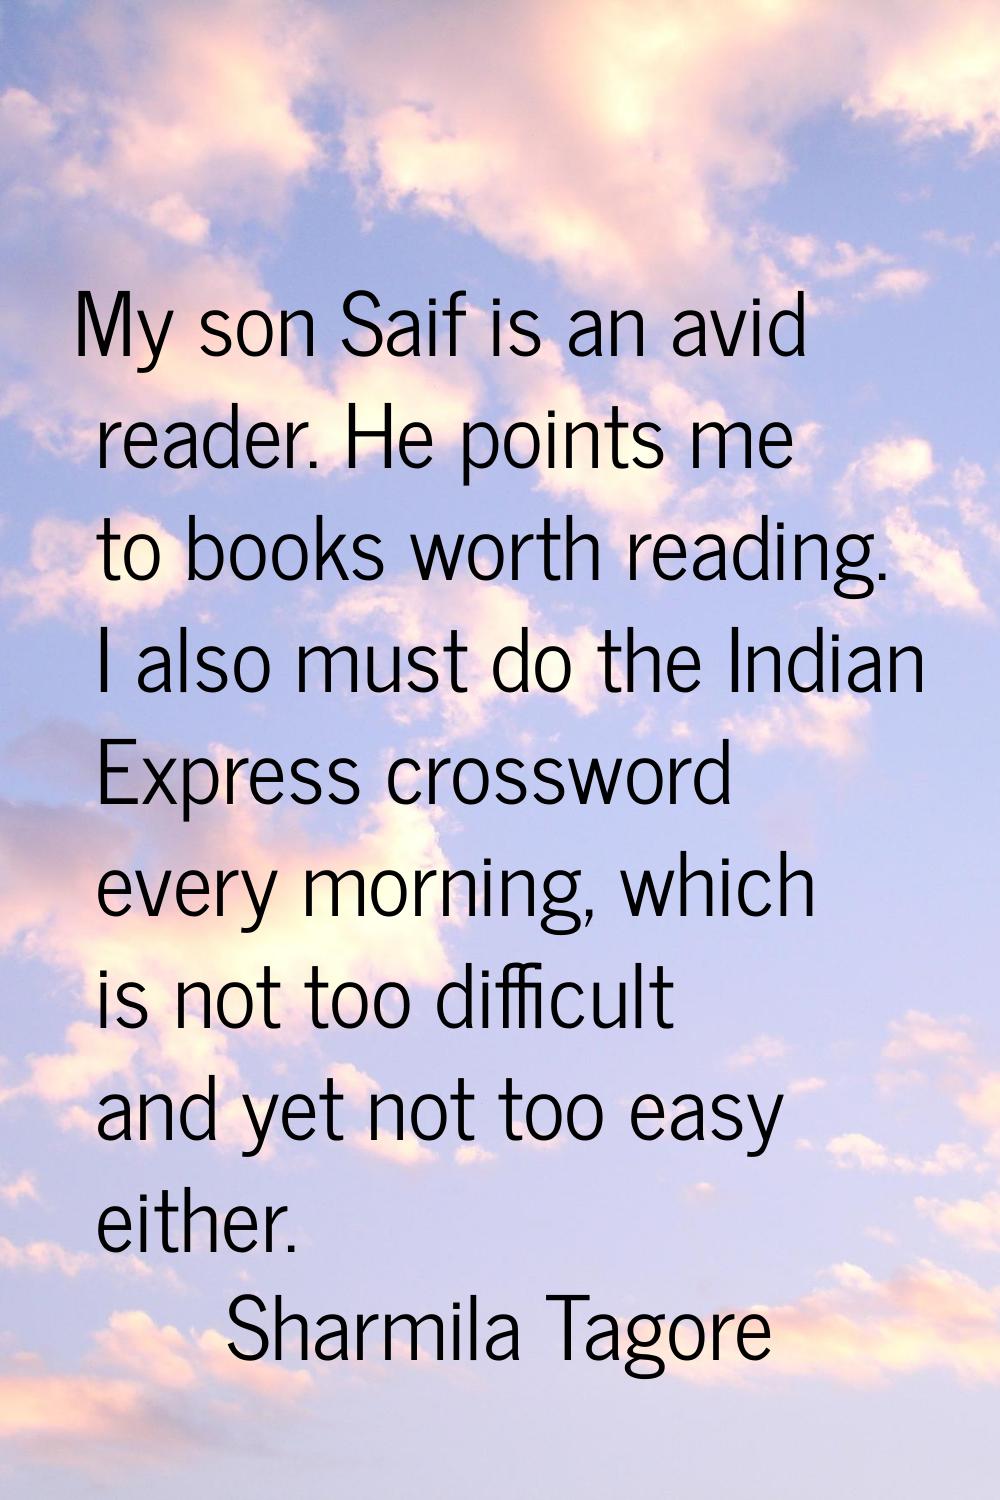 My son Saif is an avid reader. He points me to books worth reading. I also must do the Indian Expre